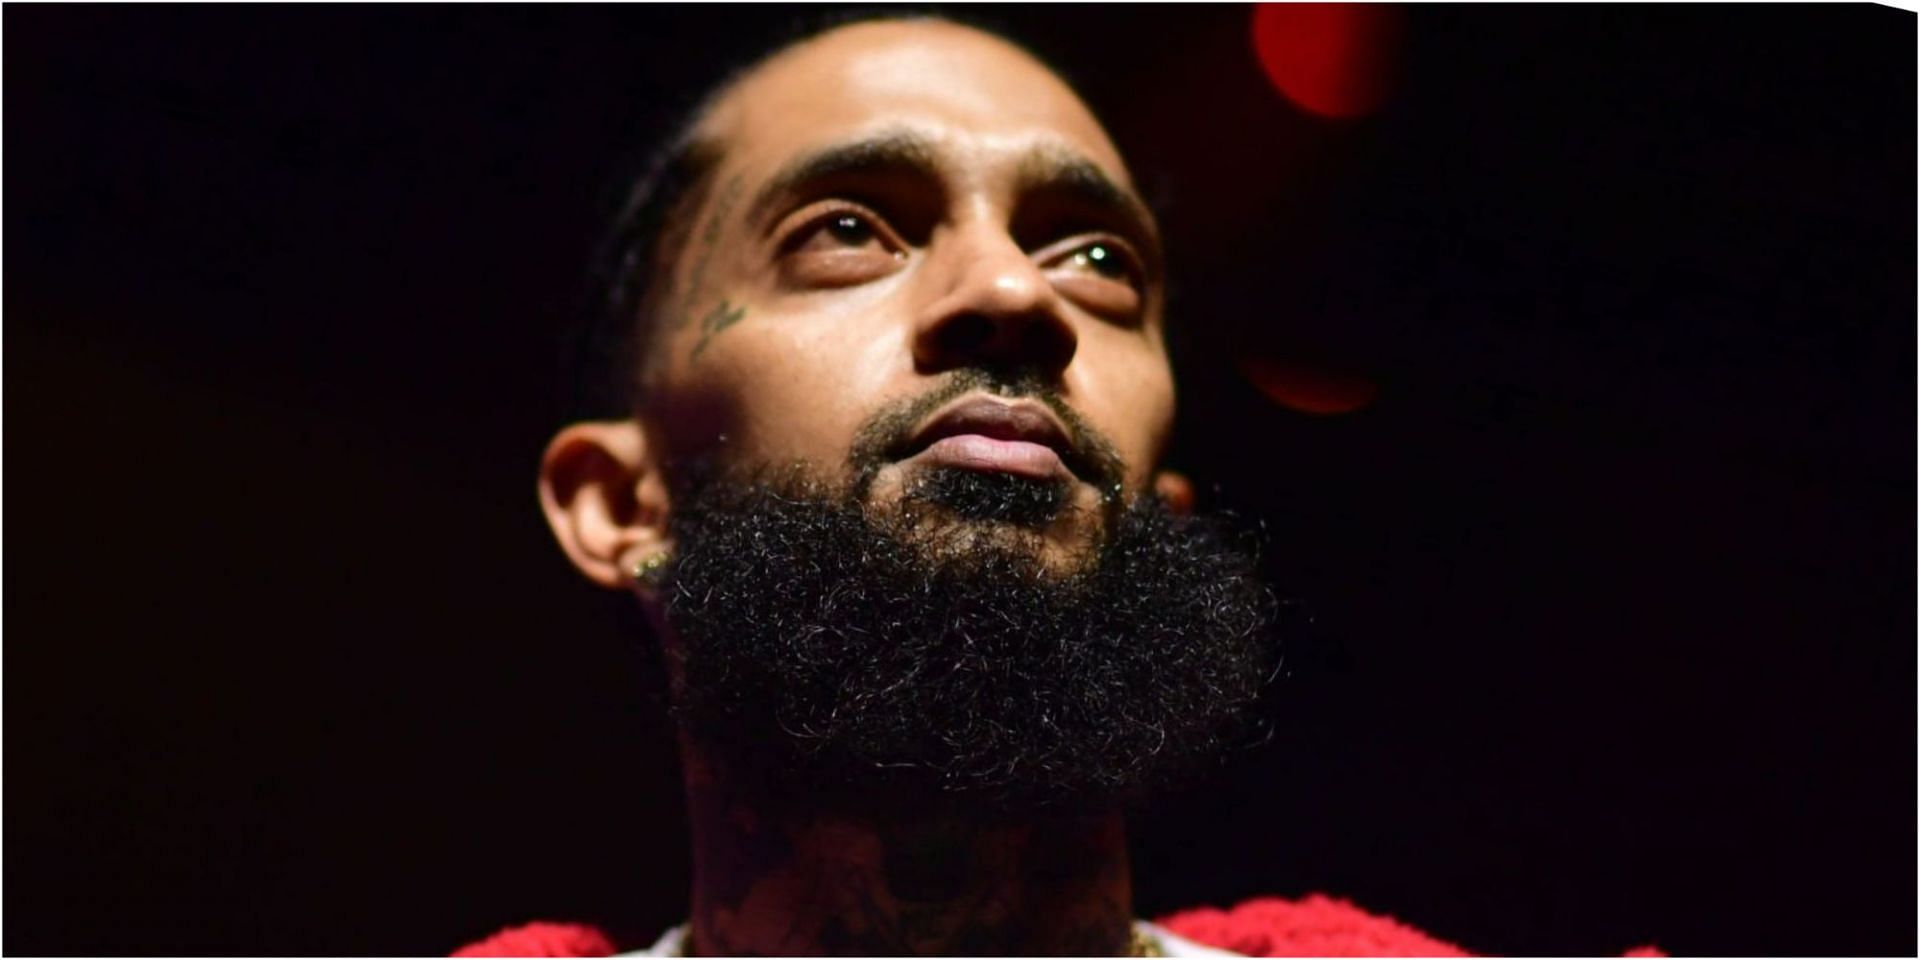 Nipsey Hussle was shot to death in March 2019 (Image via Getty Images)